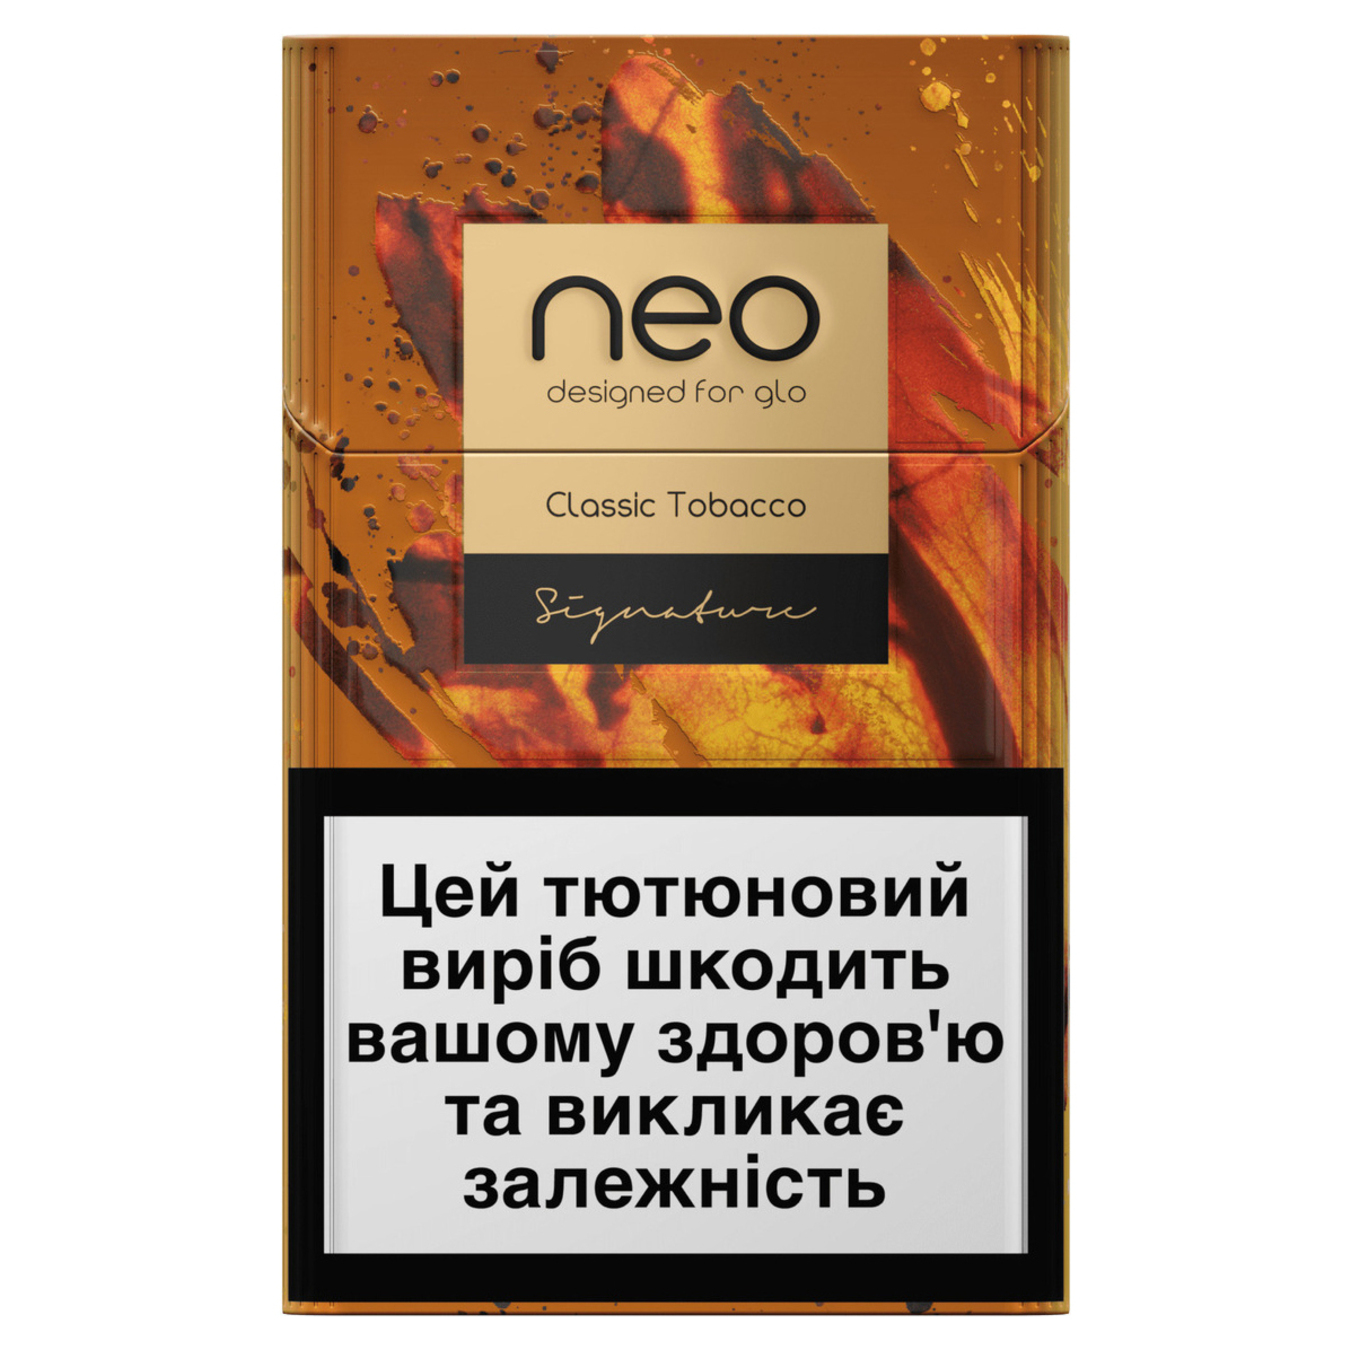 Sticks Neo Demi Classic Tobacco tobacco containing 20pcs (the price is indicated without excise tax)